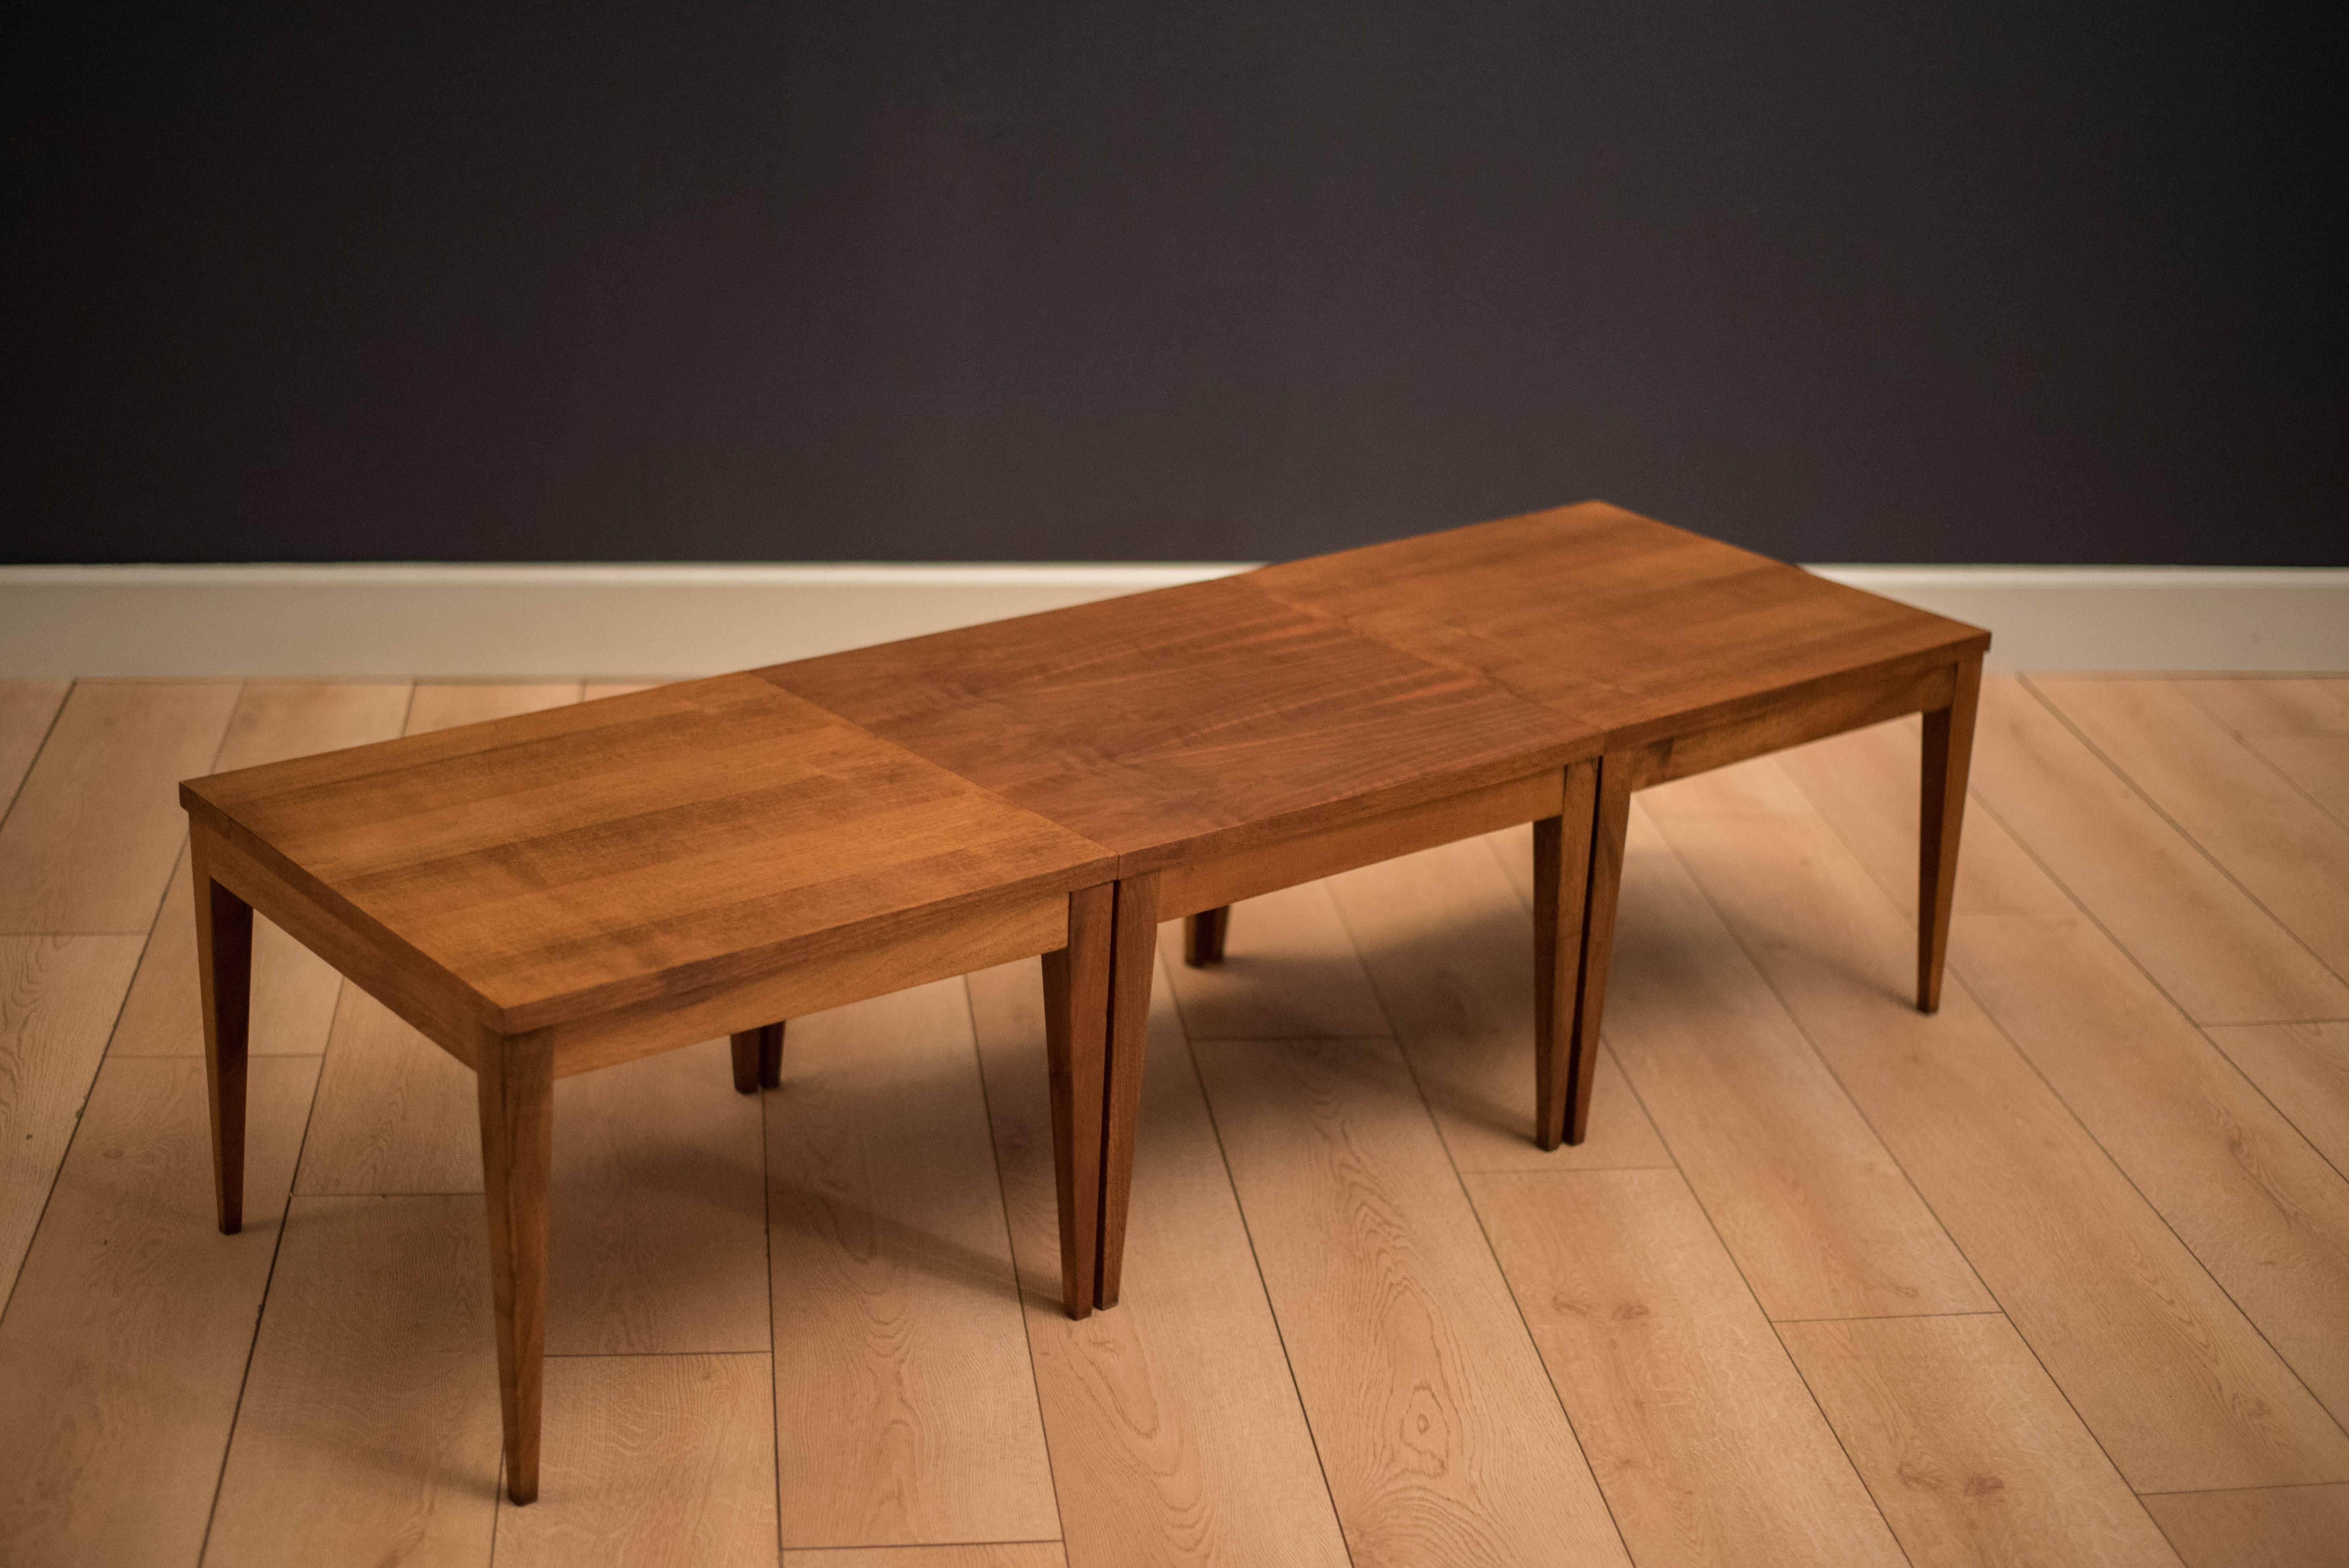 Mid Century set of three matching side tables in walnut with tapered legs. This versatile set can be used together to make a coffee table or separately as end tables.